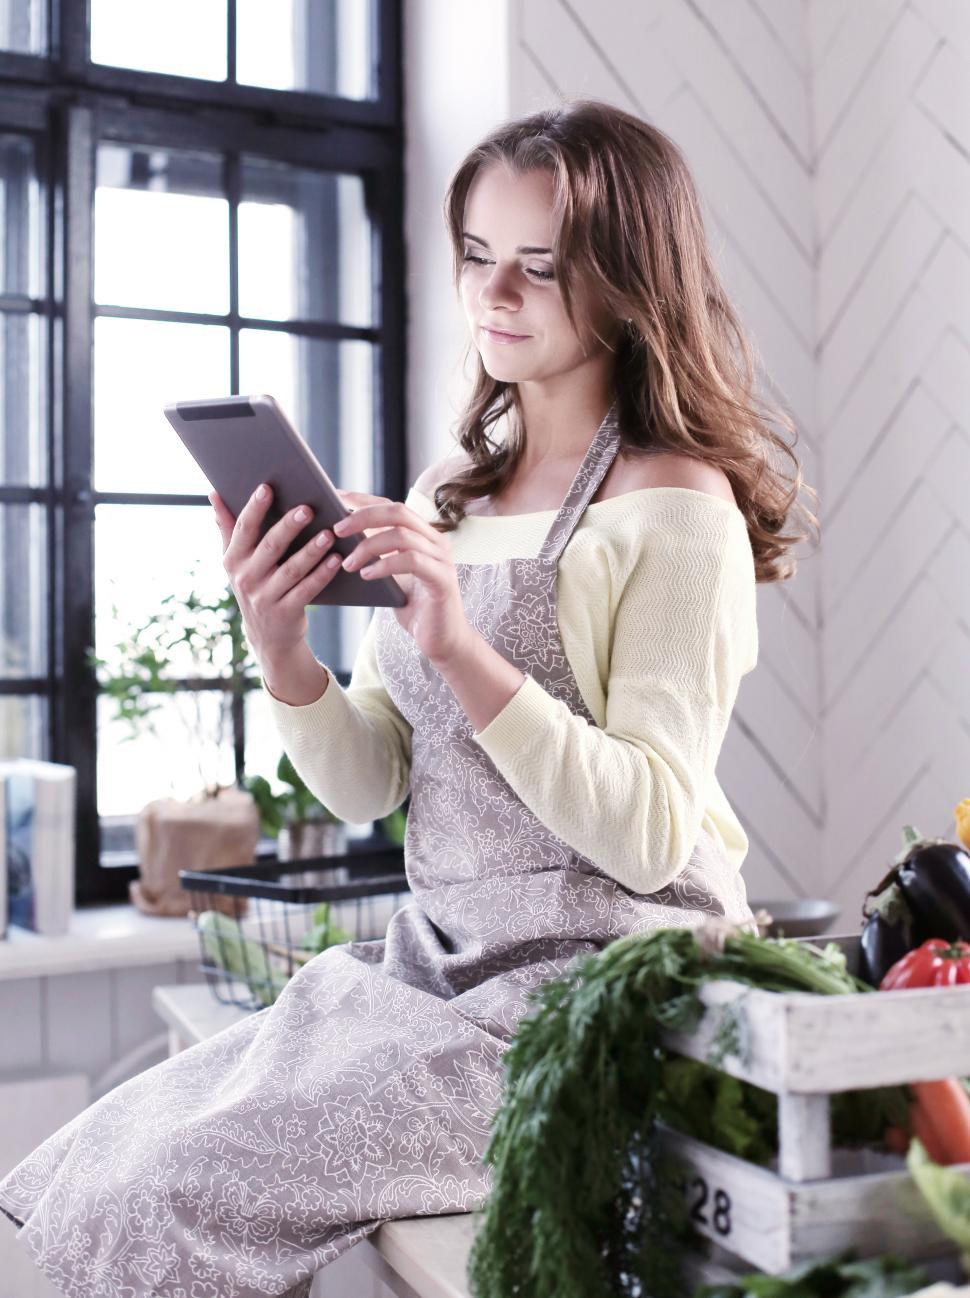 Woman looking at tablet device in the kitchen